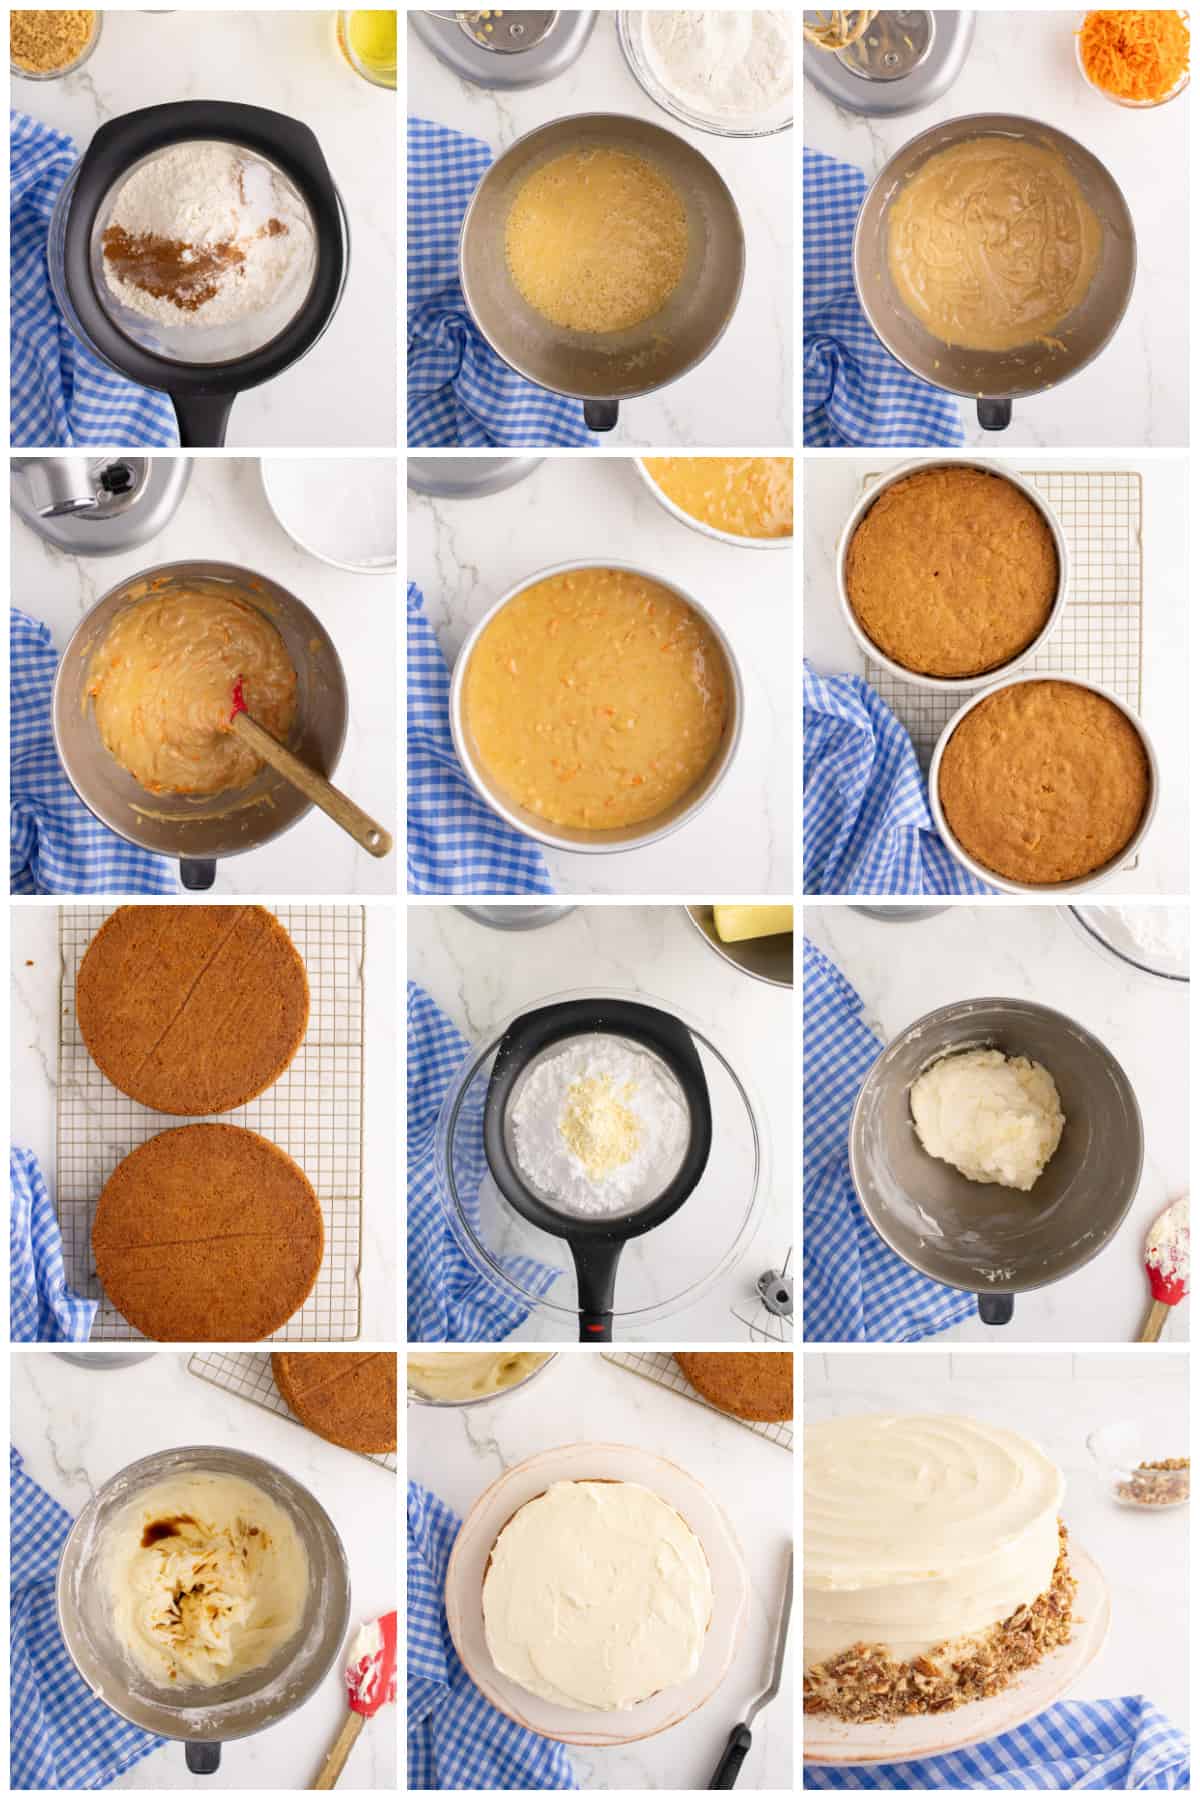 Step by step photos on how to make a Carrot Cake Recipe.